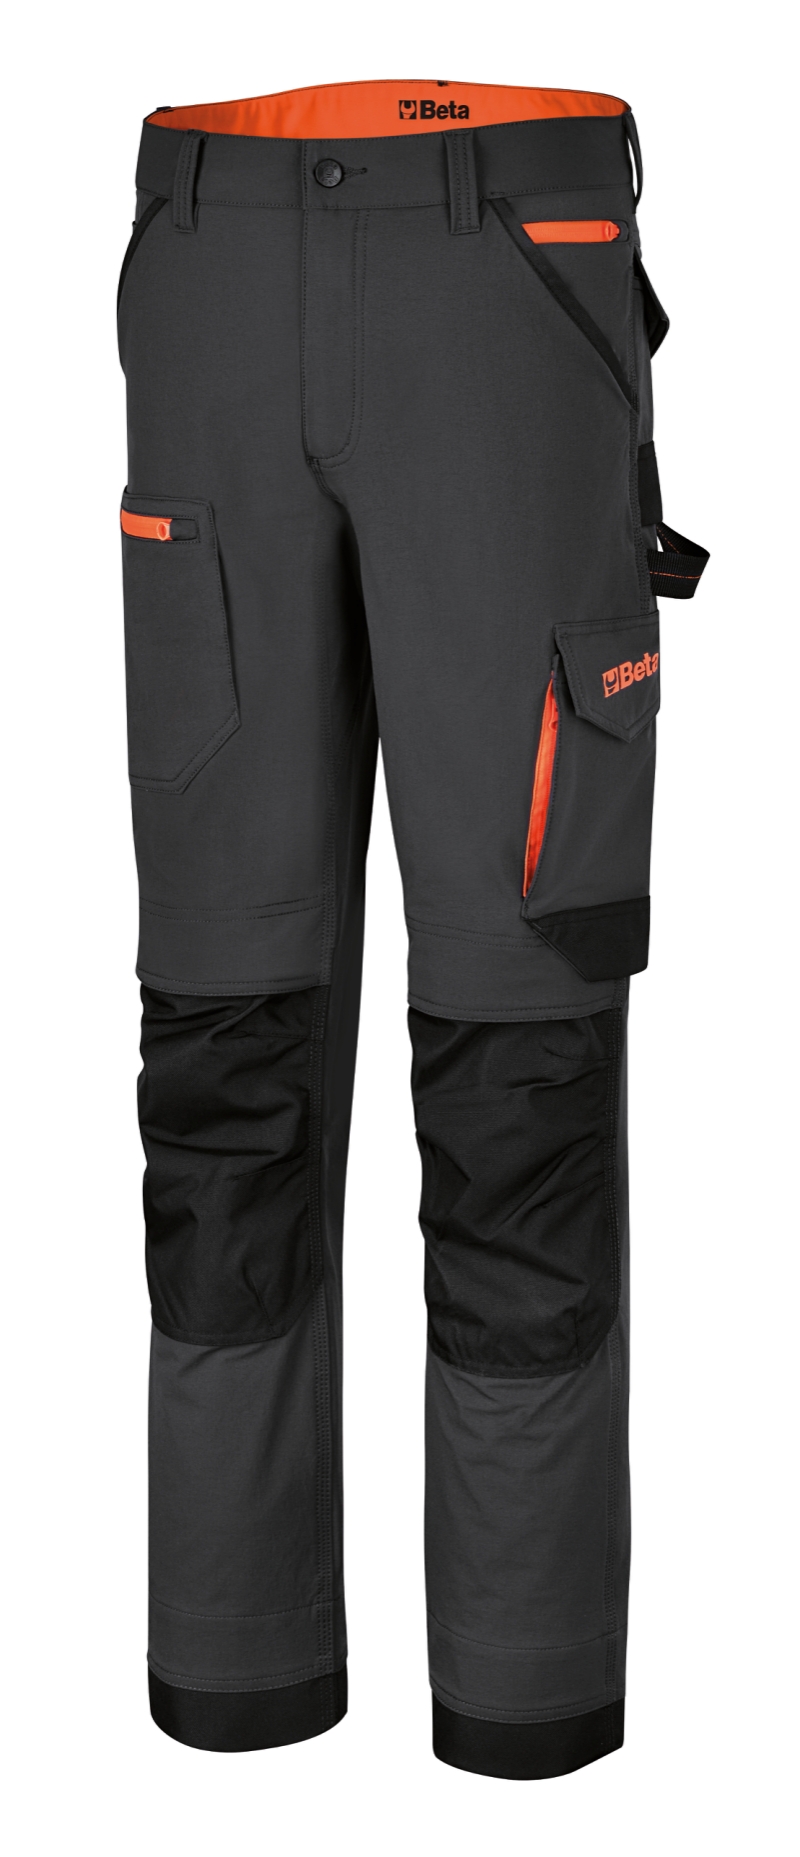 Stretch work trousers, multipocket style - Beta Tools UK